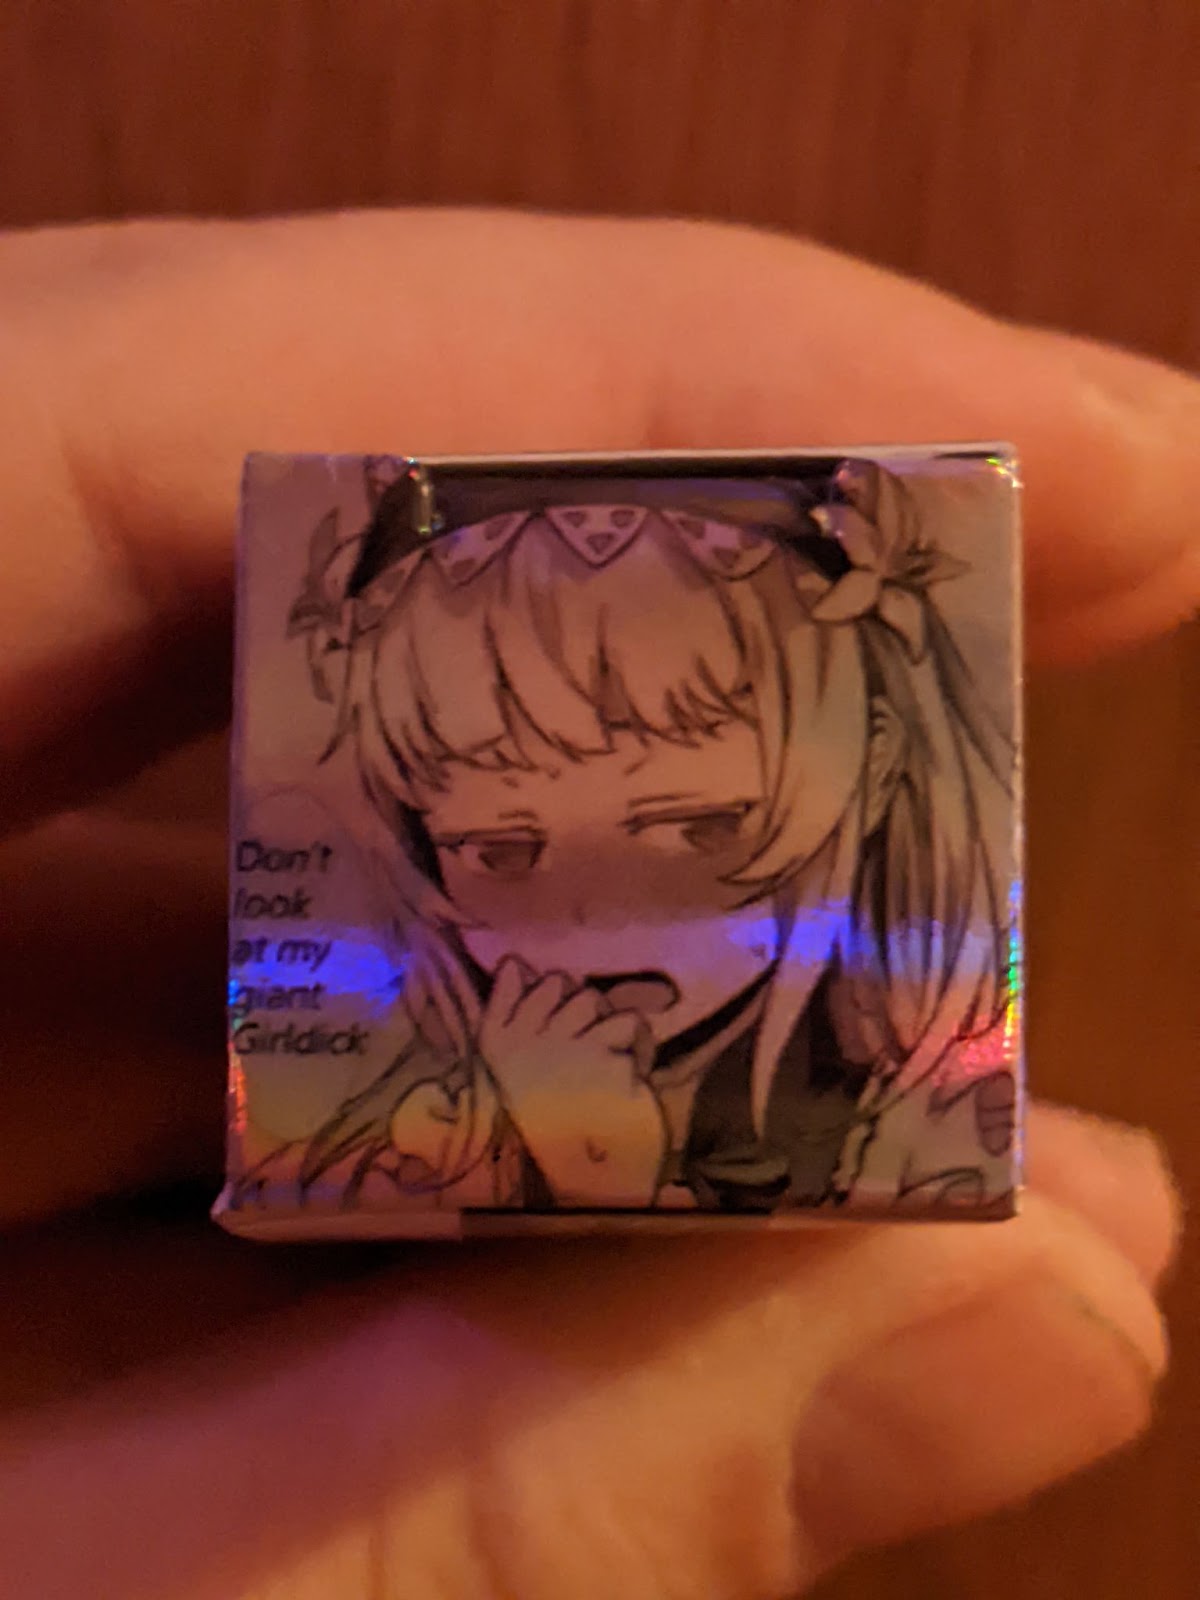 an estradiol injection bottle depicting an anime girl saying "Don't look at my giant Girldick"